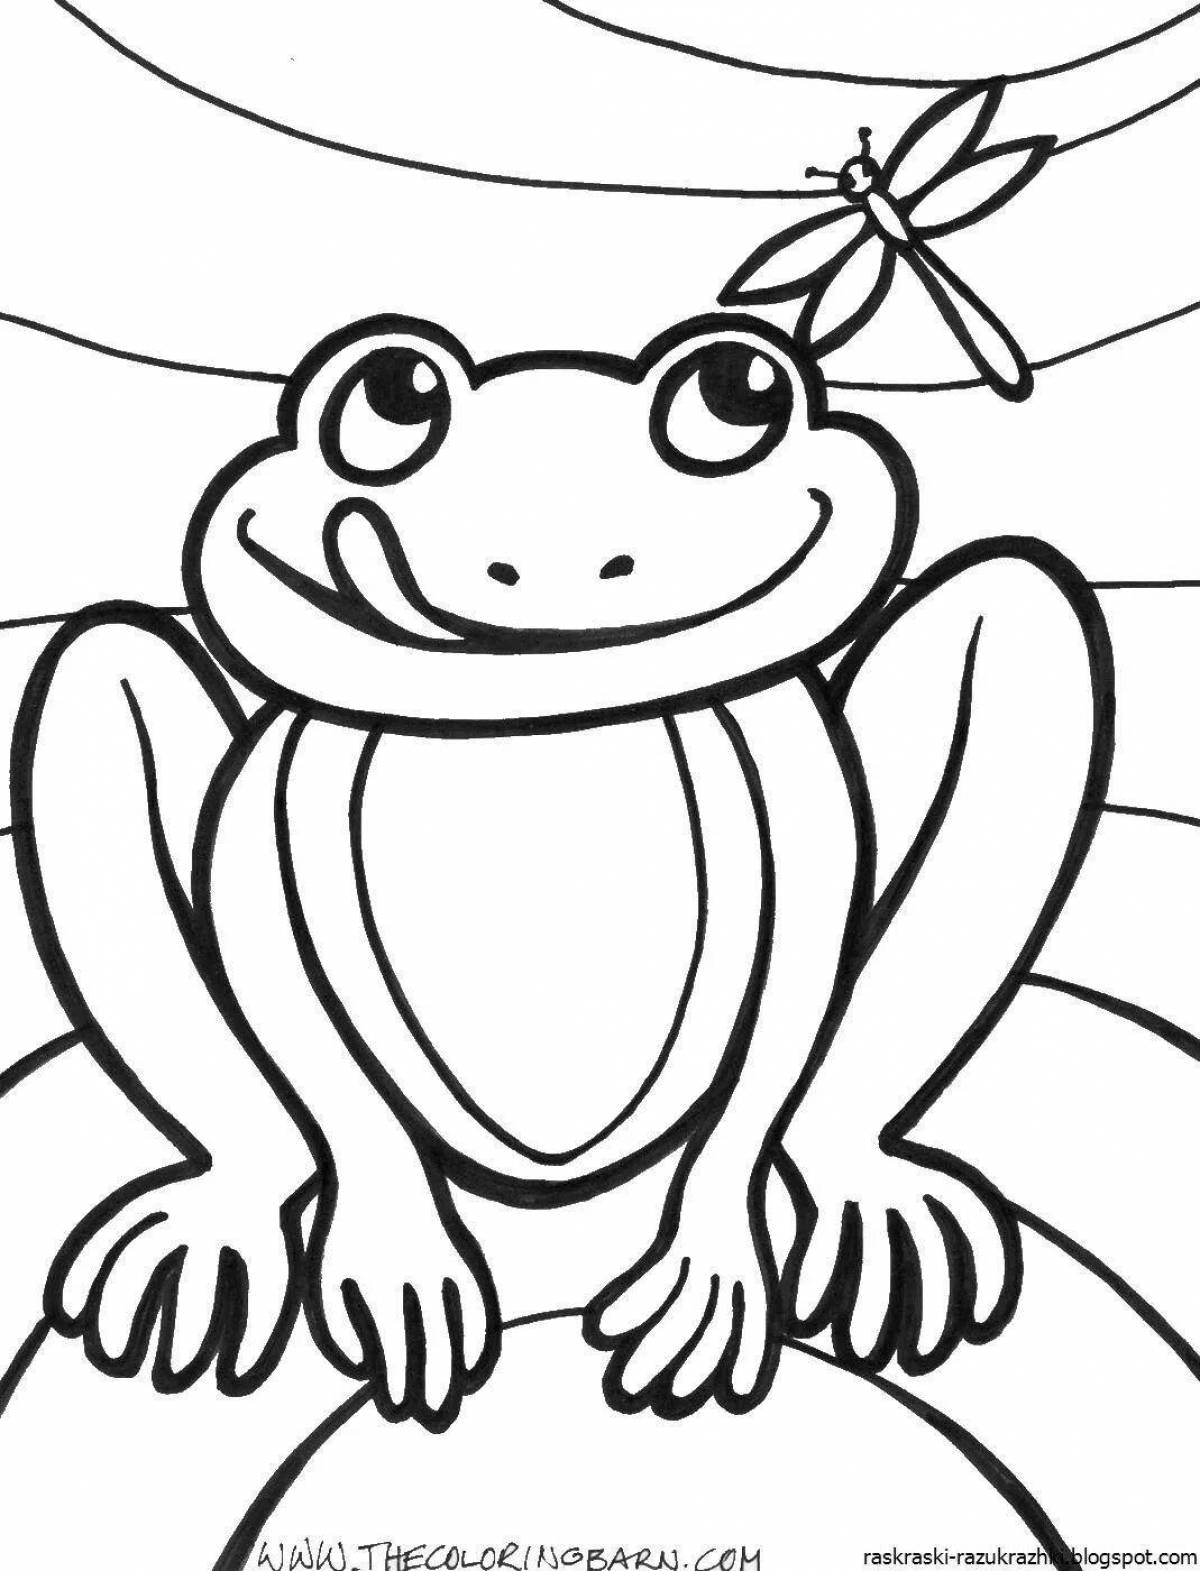 Fun toad coloring book for kids